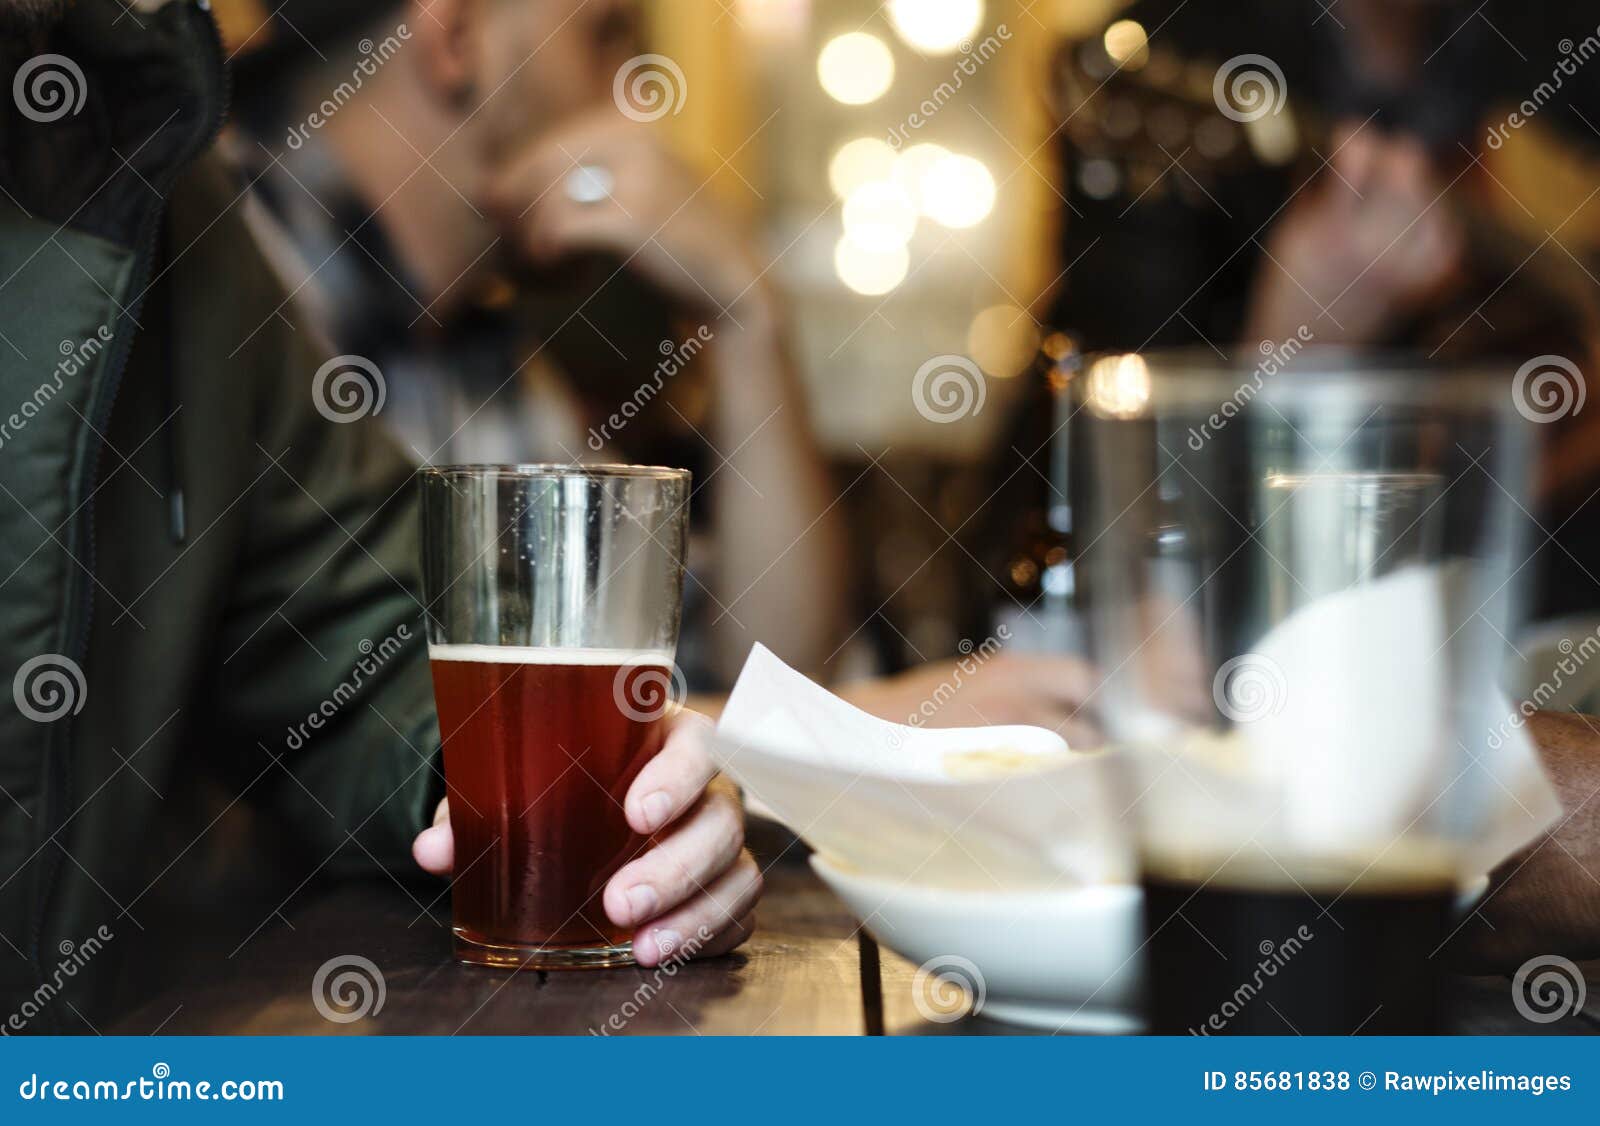 craft beer booze brew alcohol celebrate refreshment concept